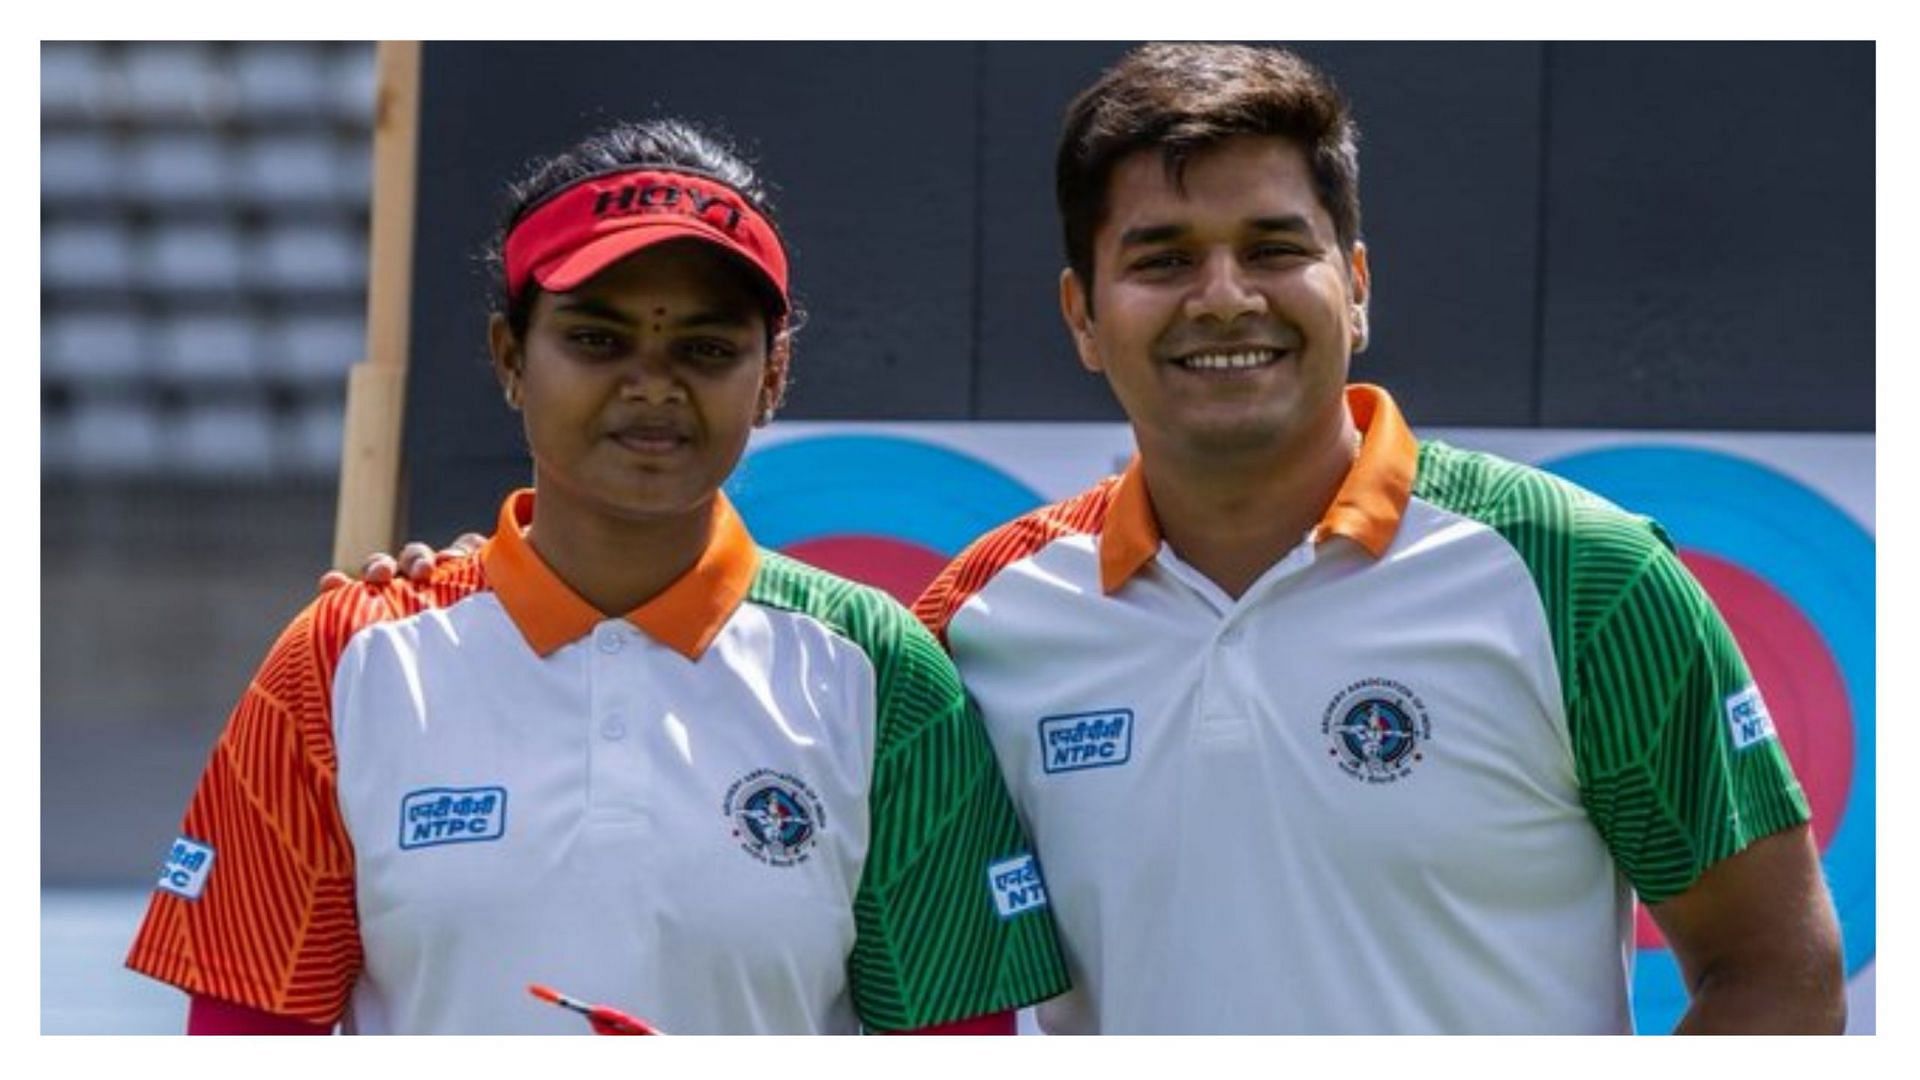 Archery World Cup Stage 3: Jyothi Surekha Vennam and Abhishek Verma win gold in the team event (Pic Credit: SAI)